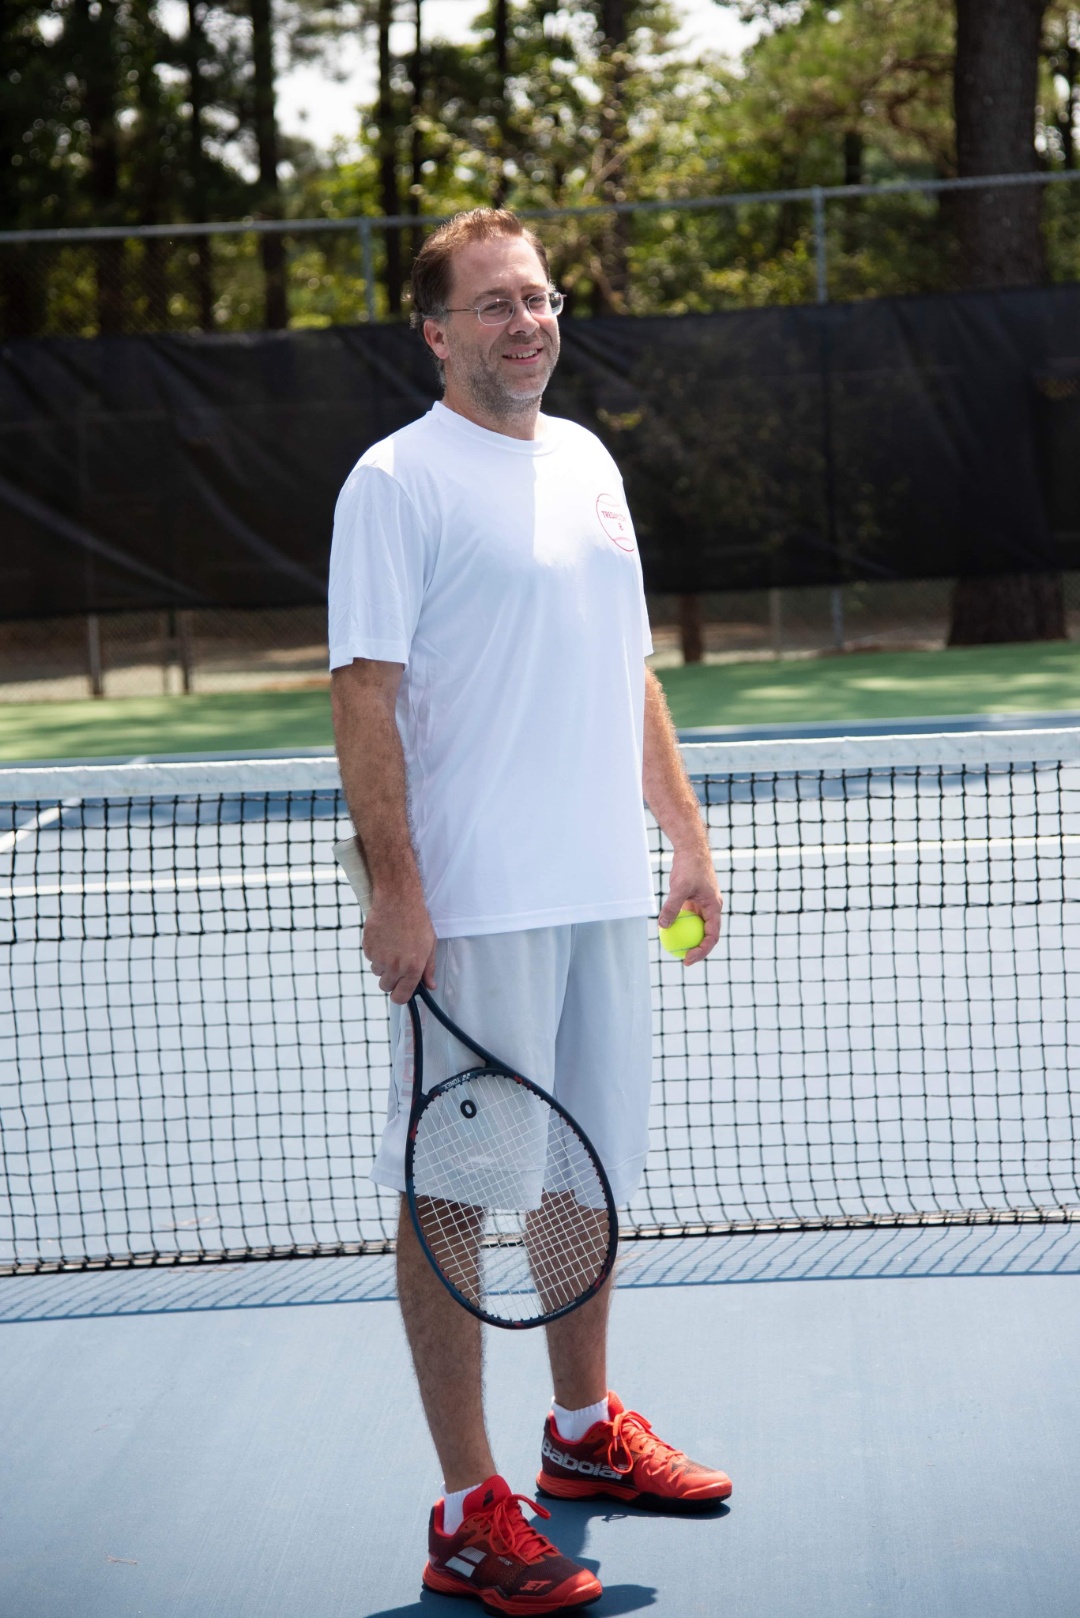 Power 92 radio deejay and UA Little Rock alumnus Travis “Tre’ Day” Rowan competes in his annual tennis charity tournament to raise money for mass communication scholarships at UA Little Rock.